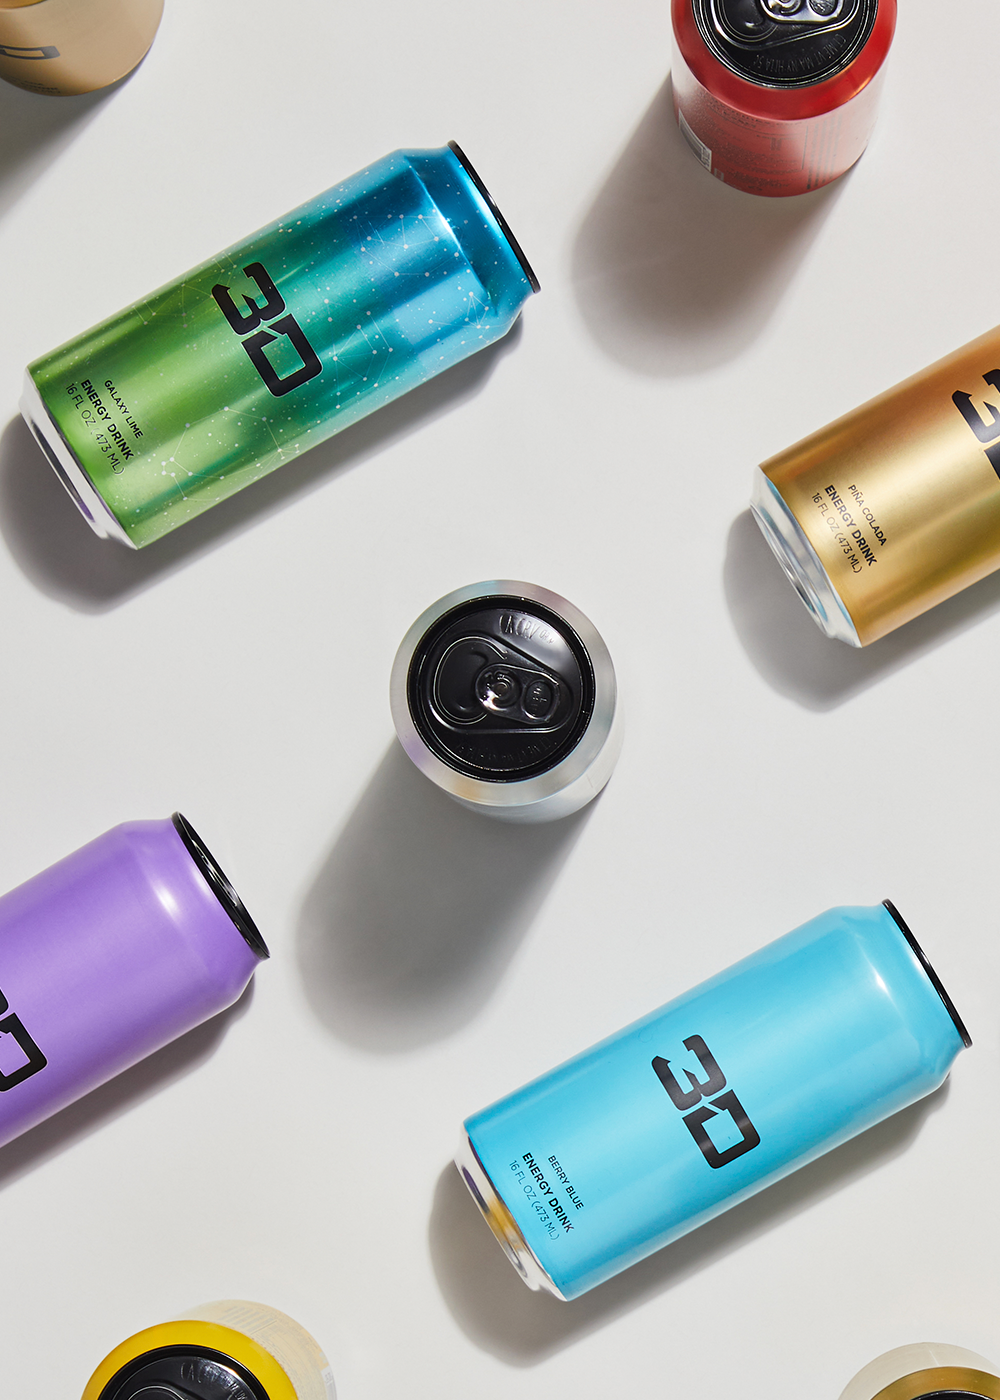 Artistically placed energy drink cans with "3D" branding in a range of flavors are displayed in an overhead arrangement.